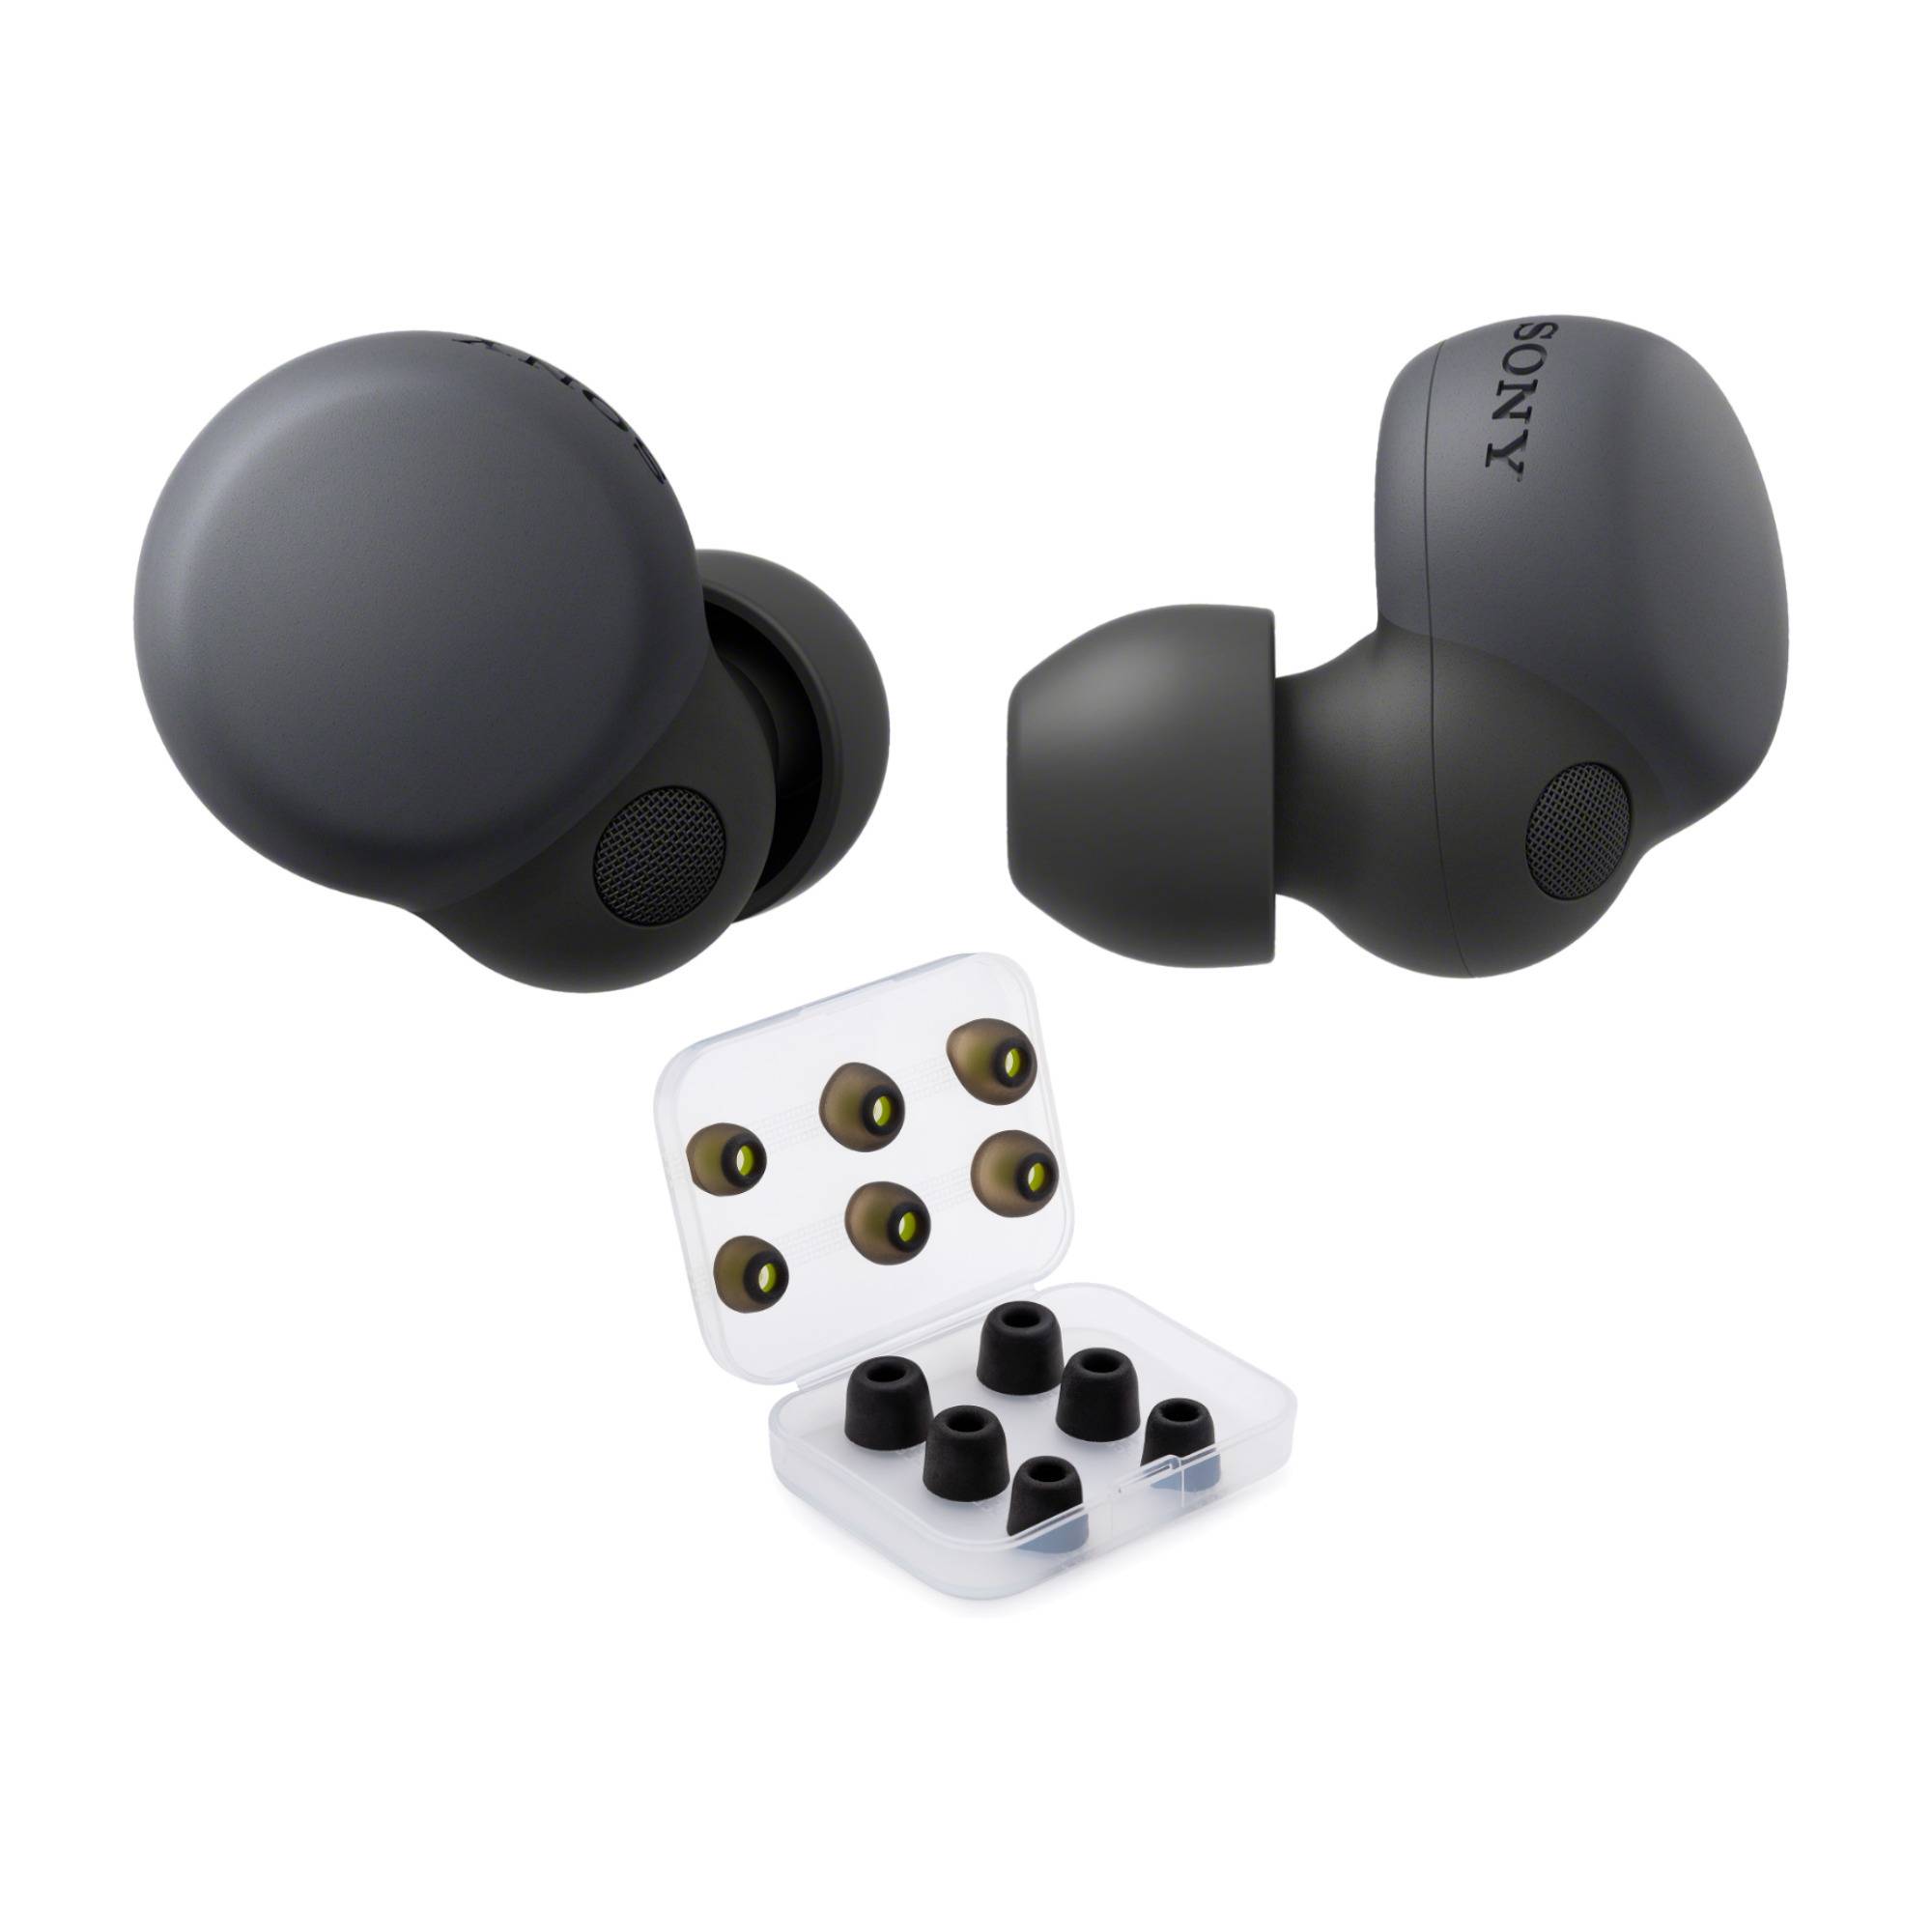 Sony LinkBuds S Truly Wireless Noise Canceling Earbud Headphones with Ear Tips